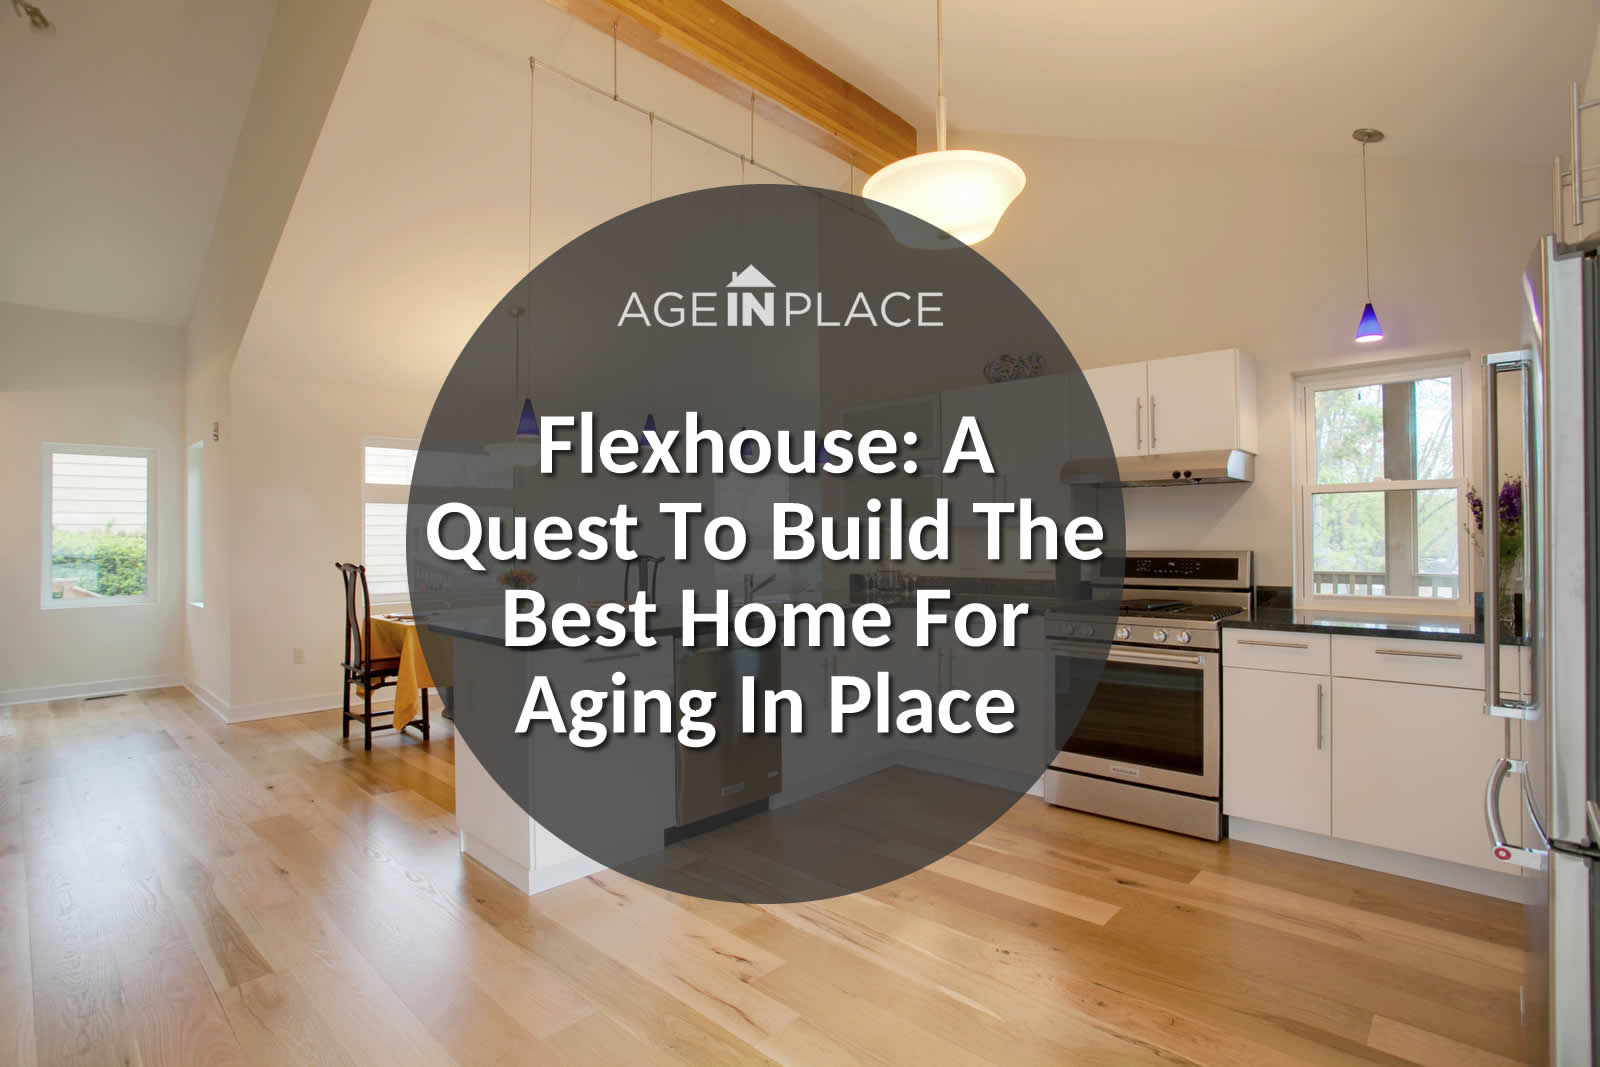 Homes Designed for Aging In Place 